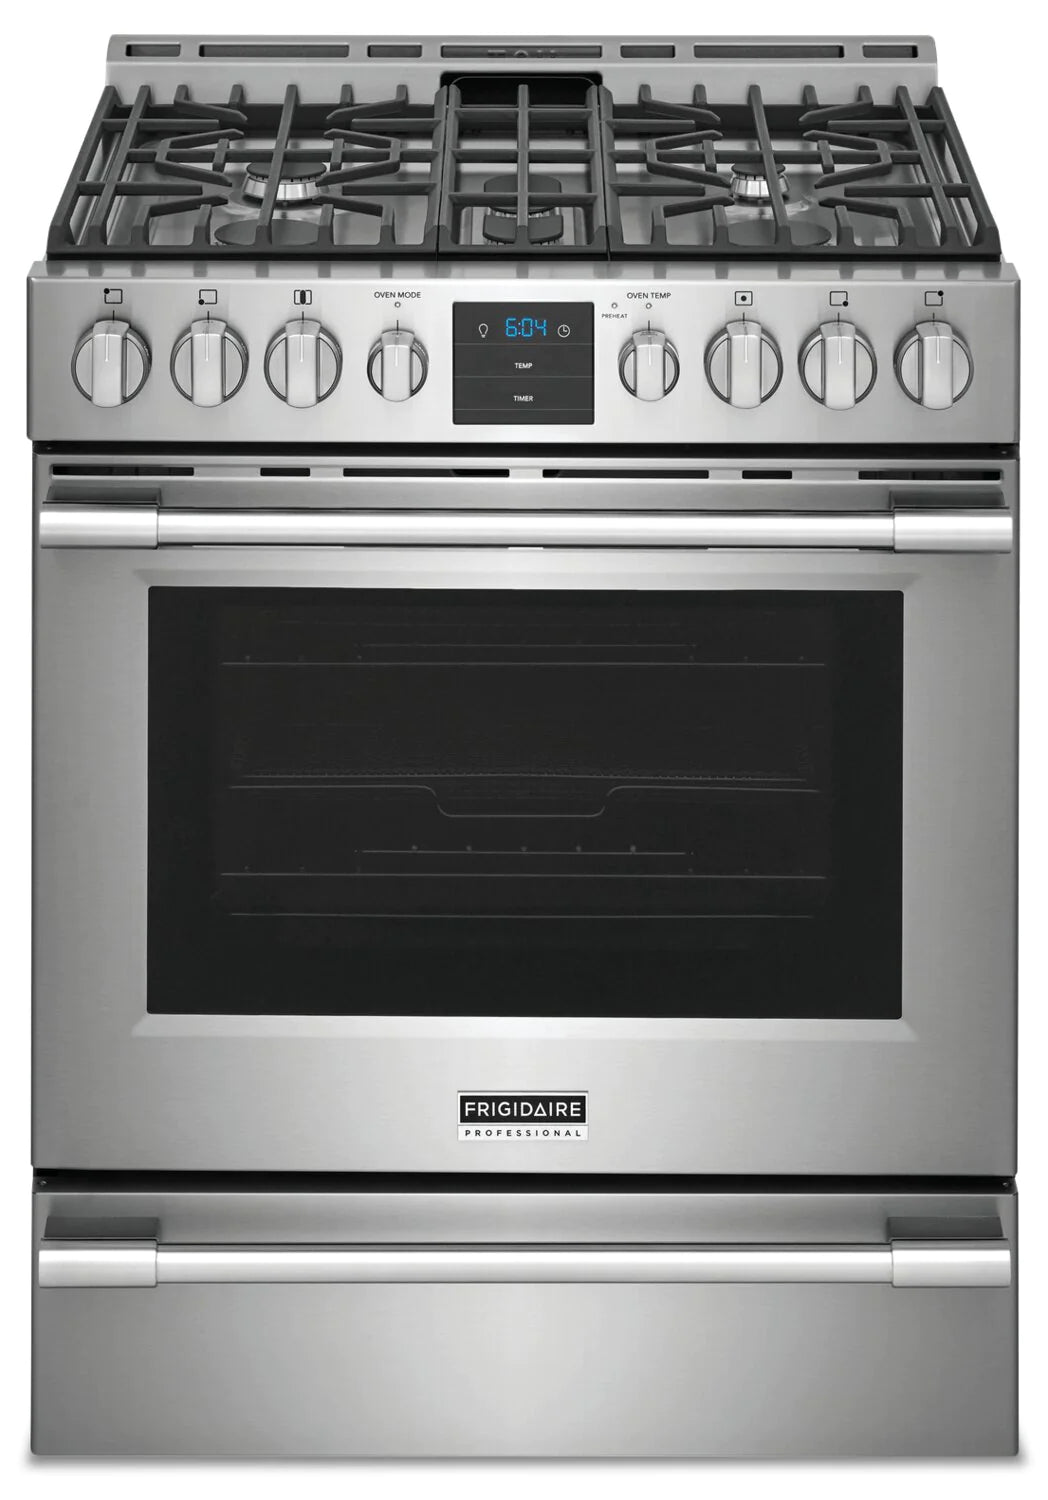 Frigidaire Ranges 30" Stainless Steel PCFG3078AF